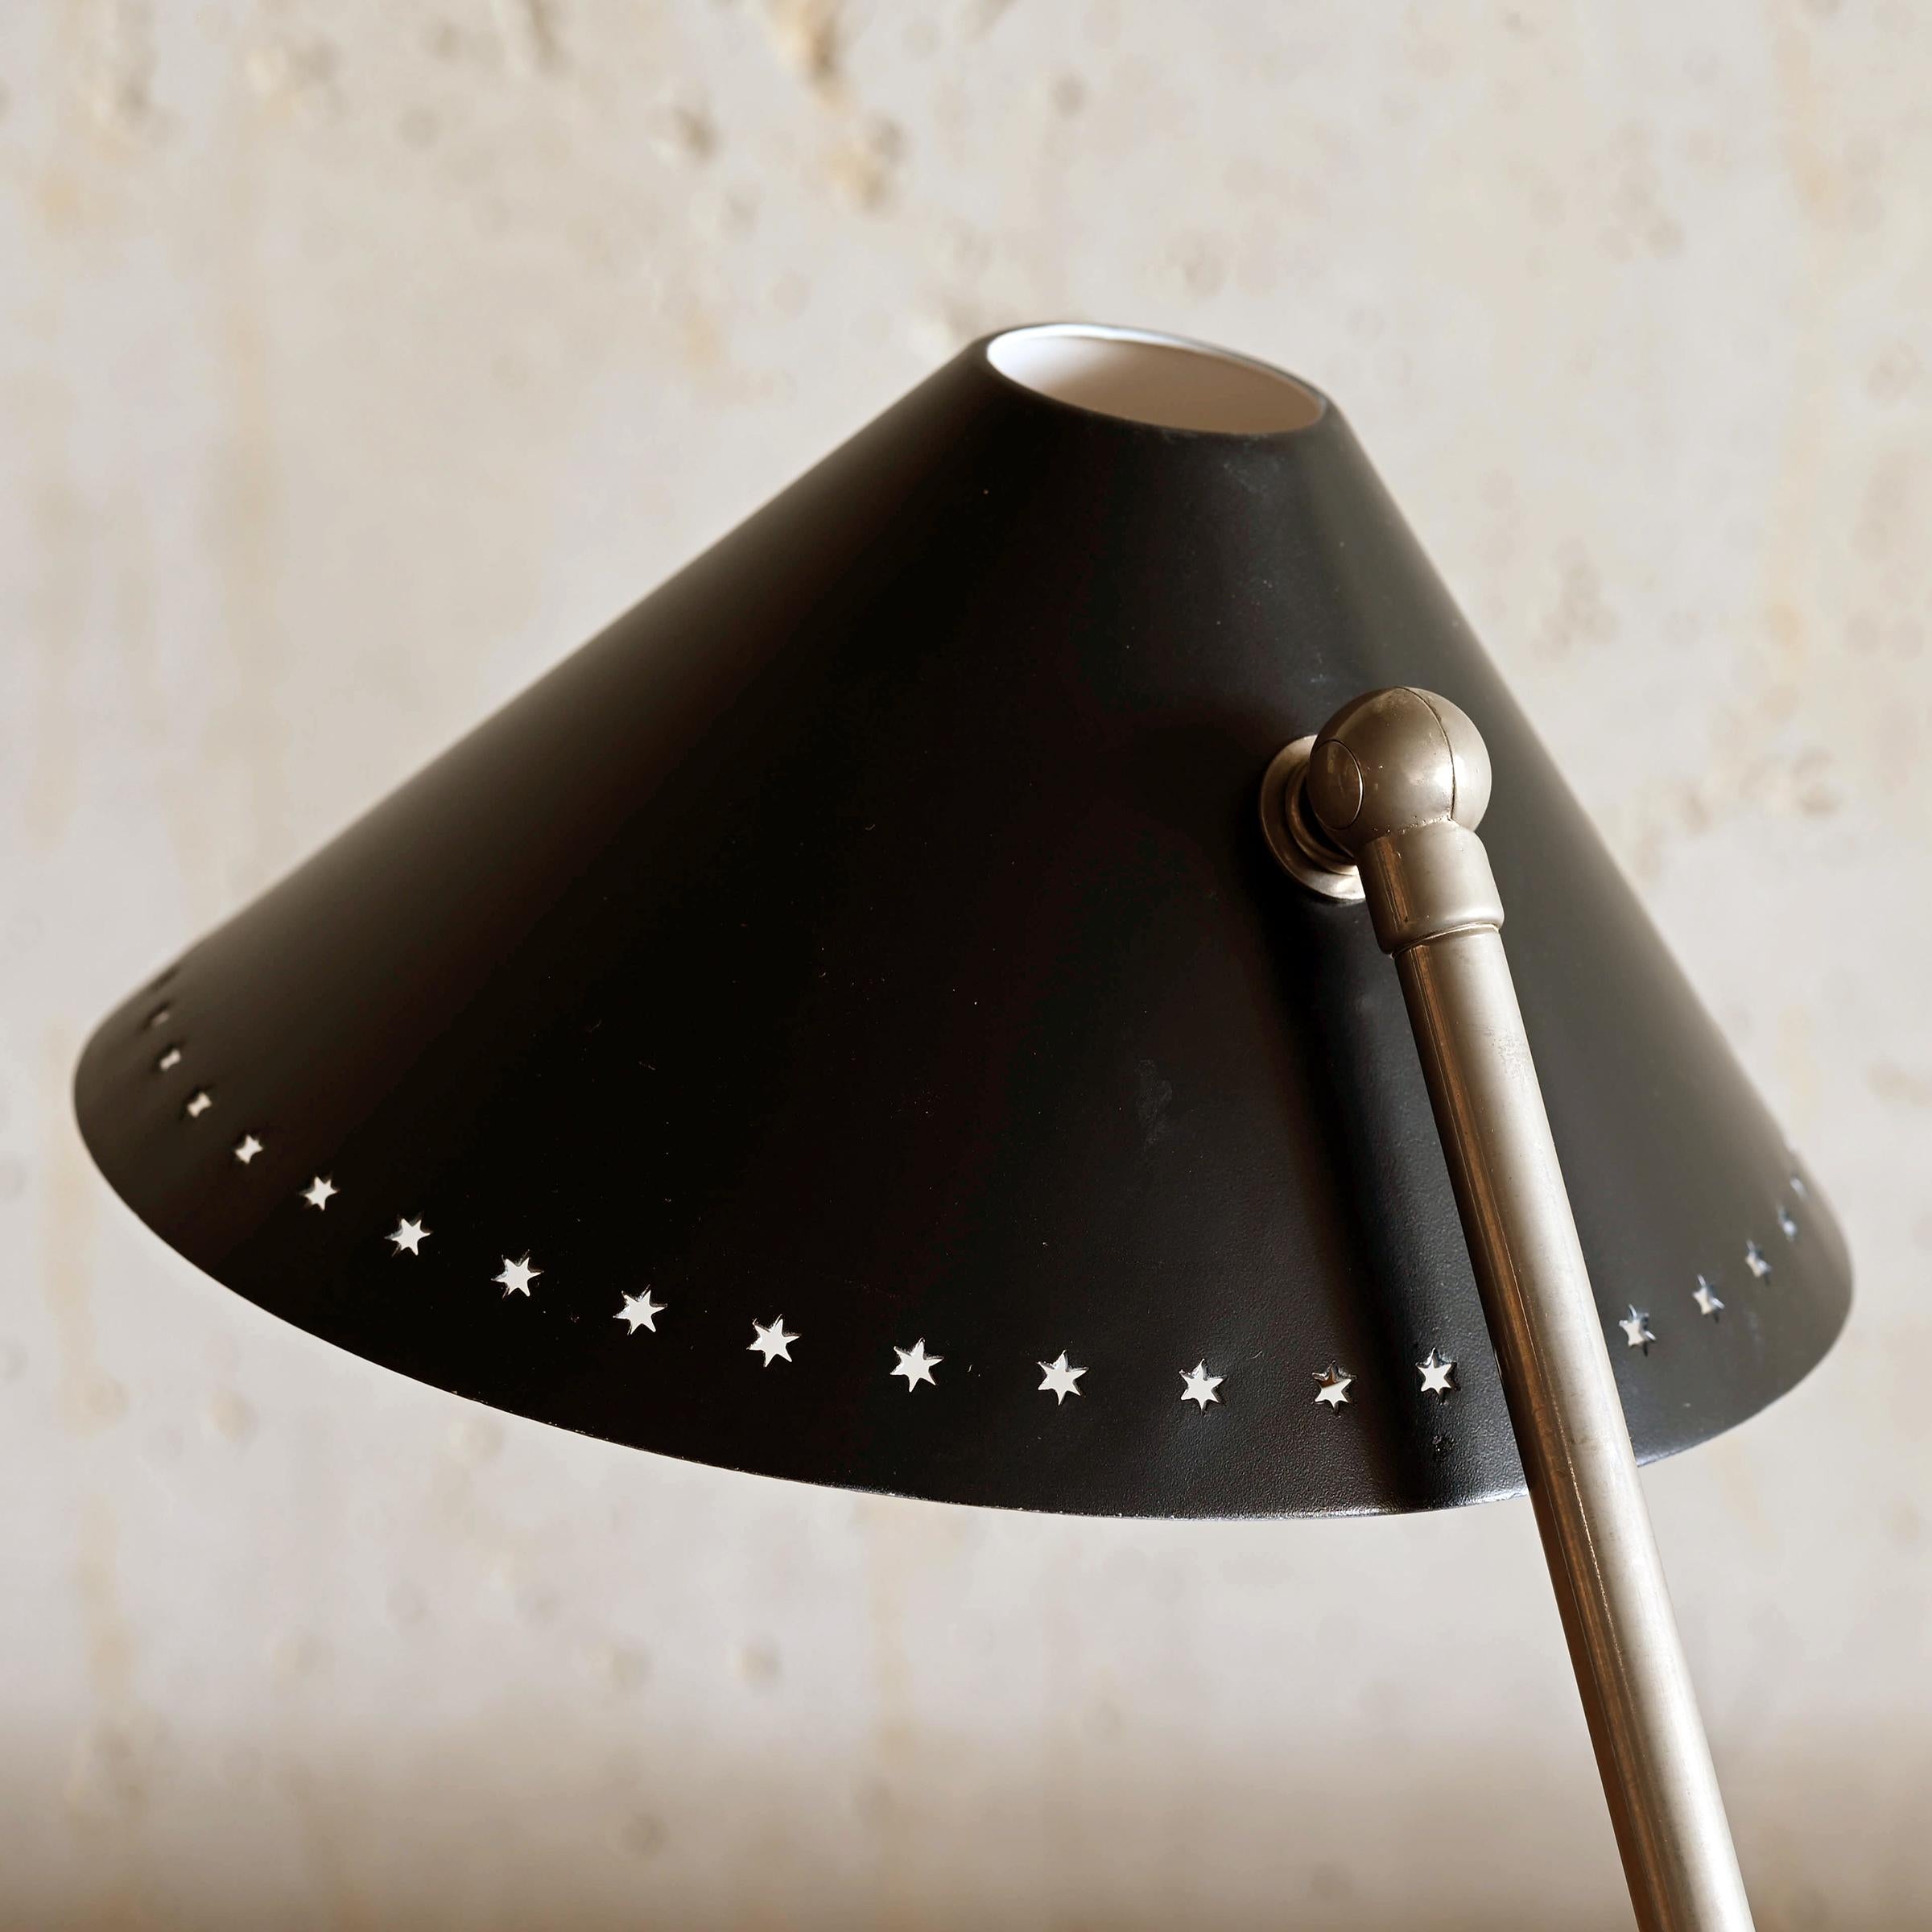 Pinocchio Lamp with black shade by H. Busquet for Hala Zeist, Netherlands For Sale 4